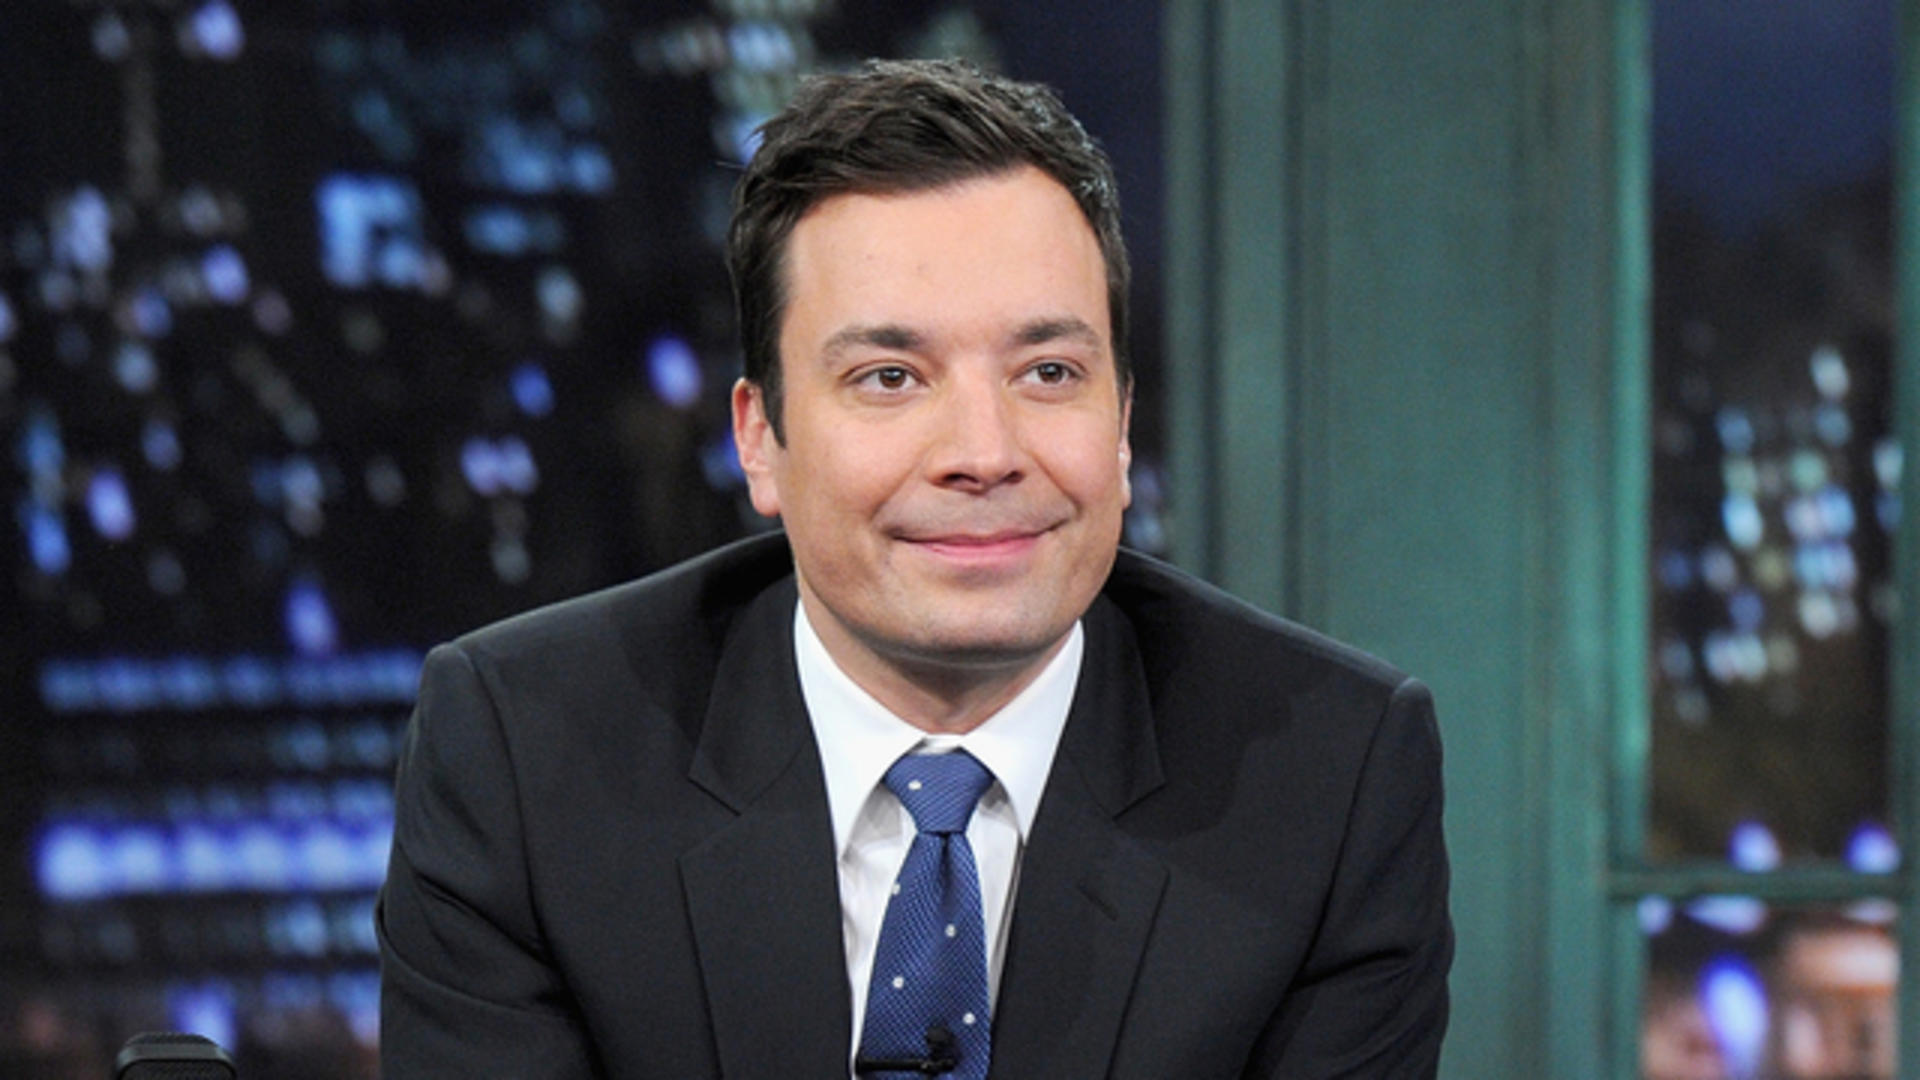 The Show with Jimmy Fallon" to premiere Monday night - CBS News